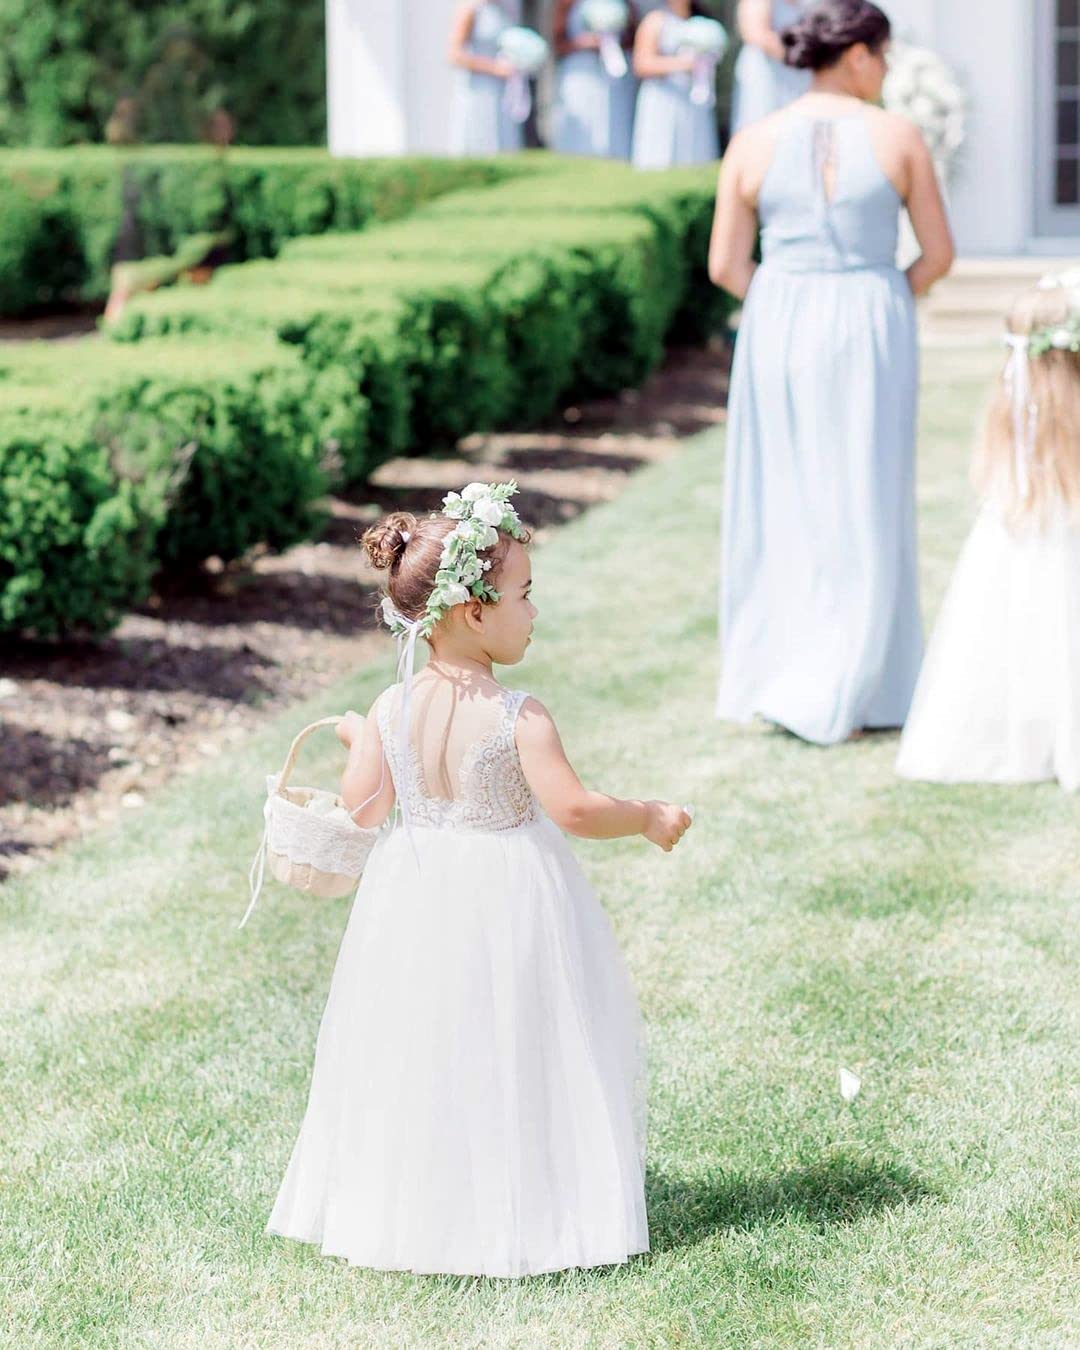 2Bunnies Flower Girl Dress Peony Lace Back A-Line Sleeveless Straight Tulle Maxi (White) - 2BUNNIES